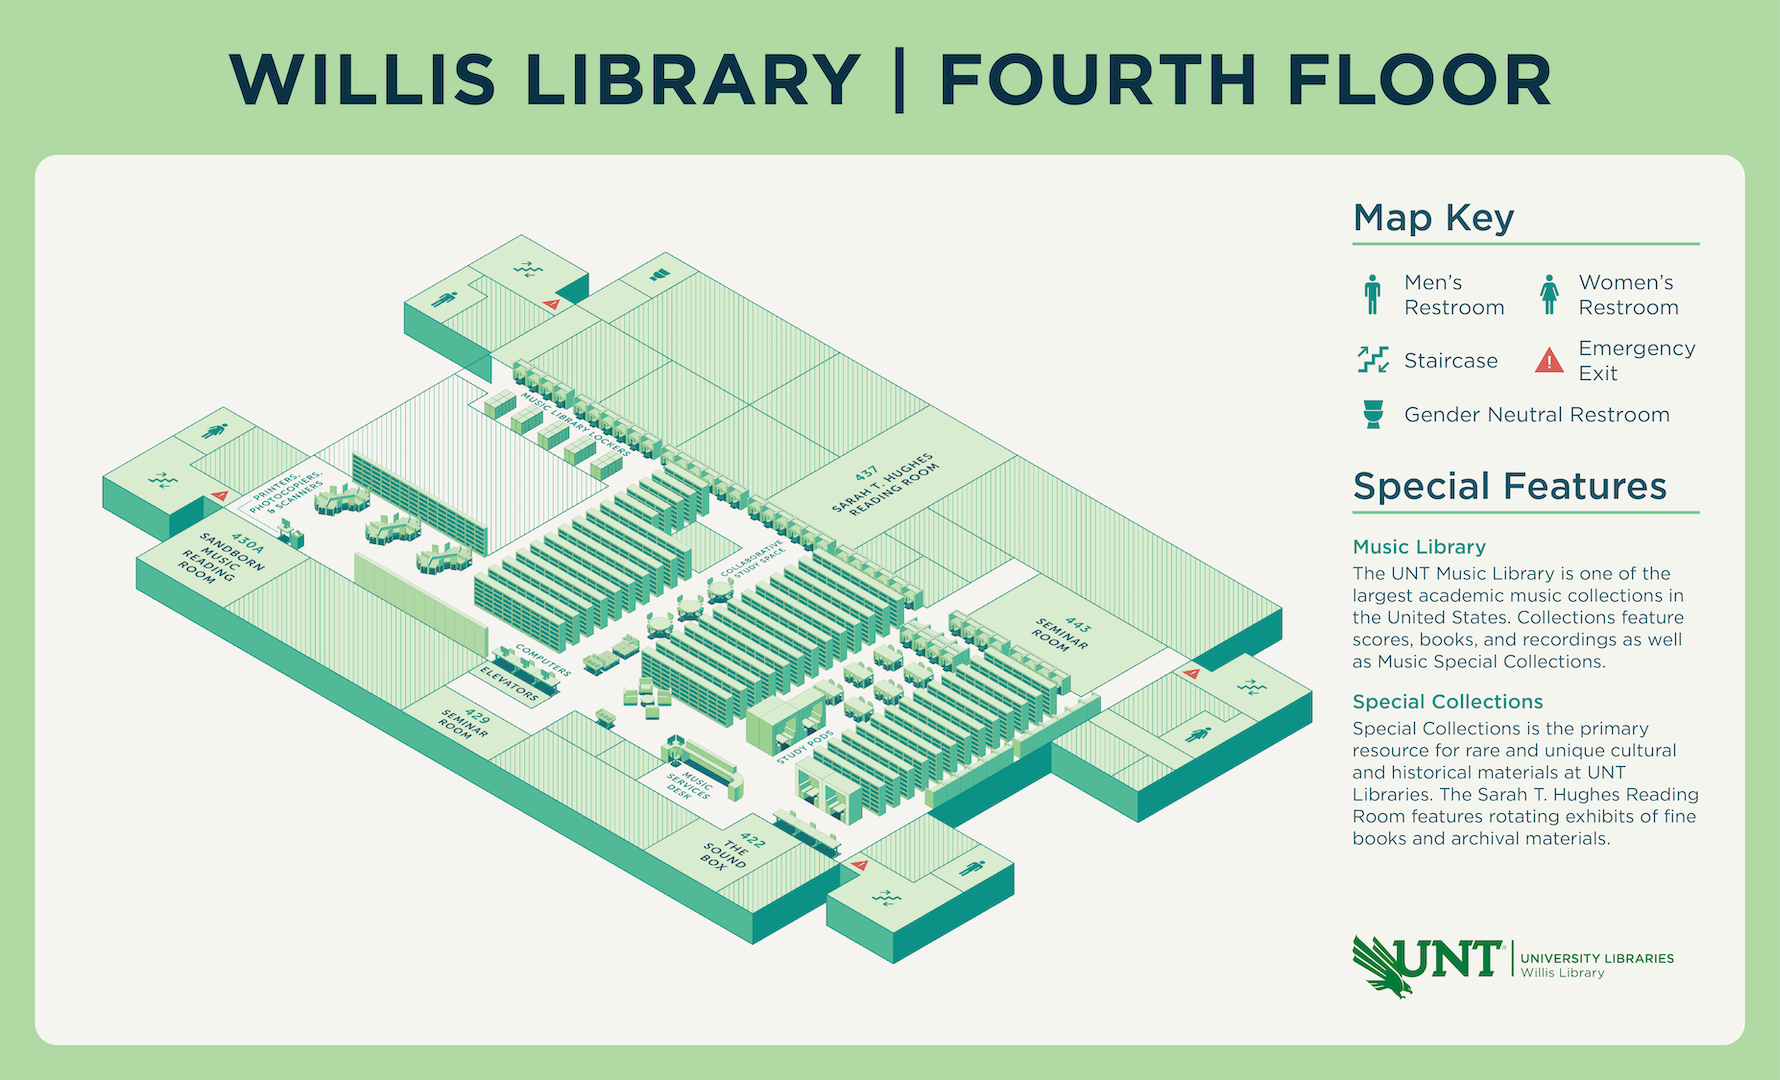 Fourth Floor Map of Willis Library